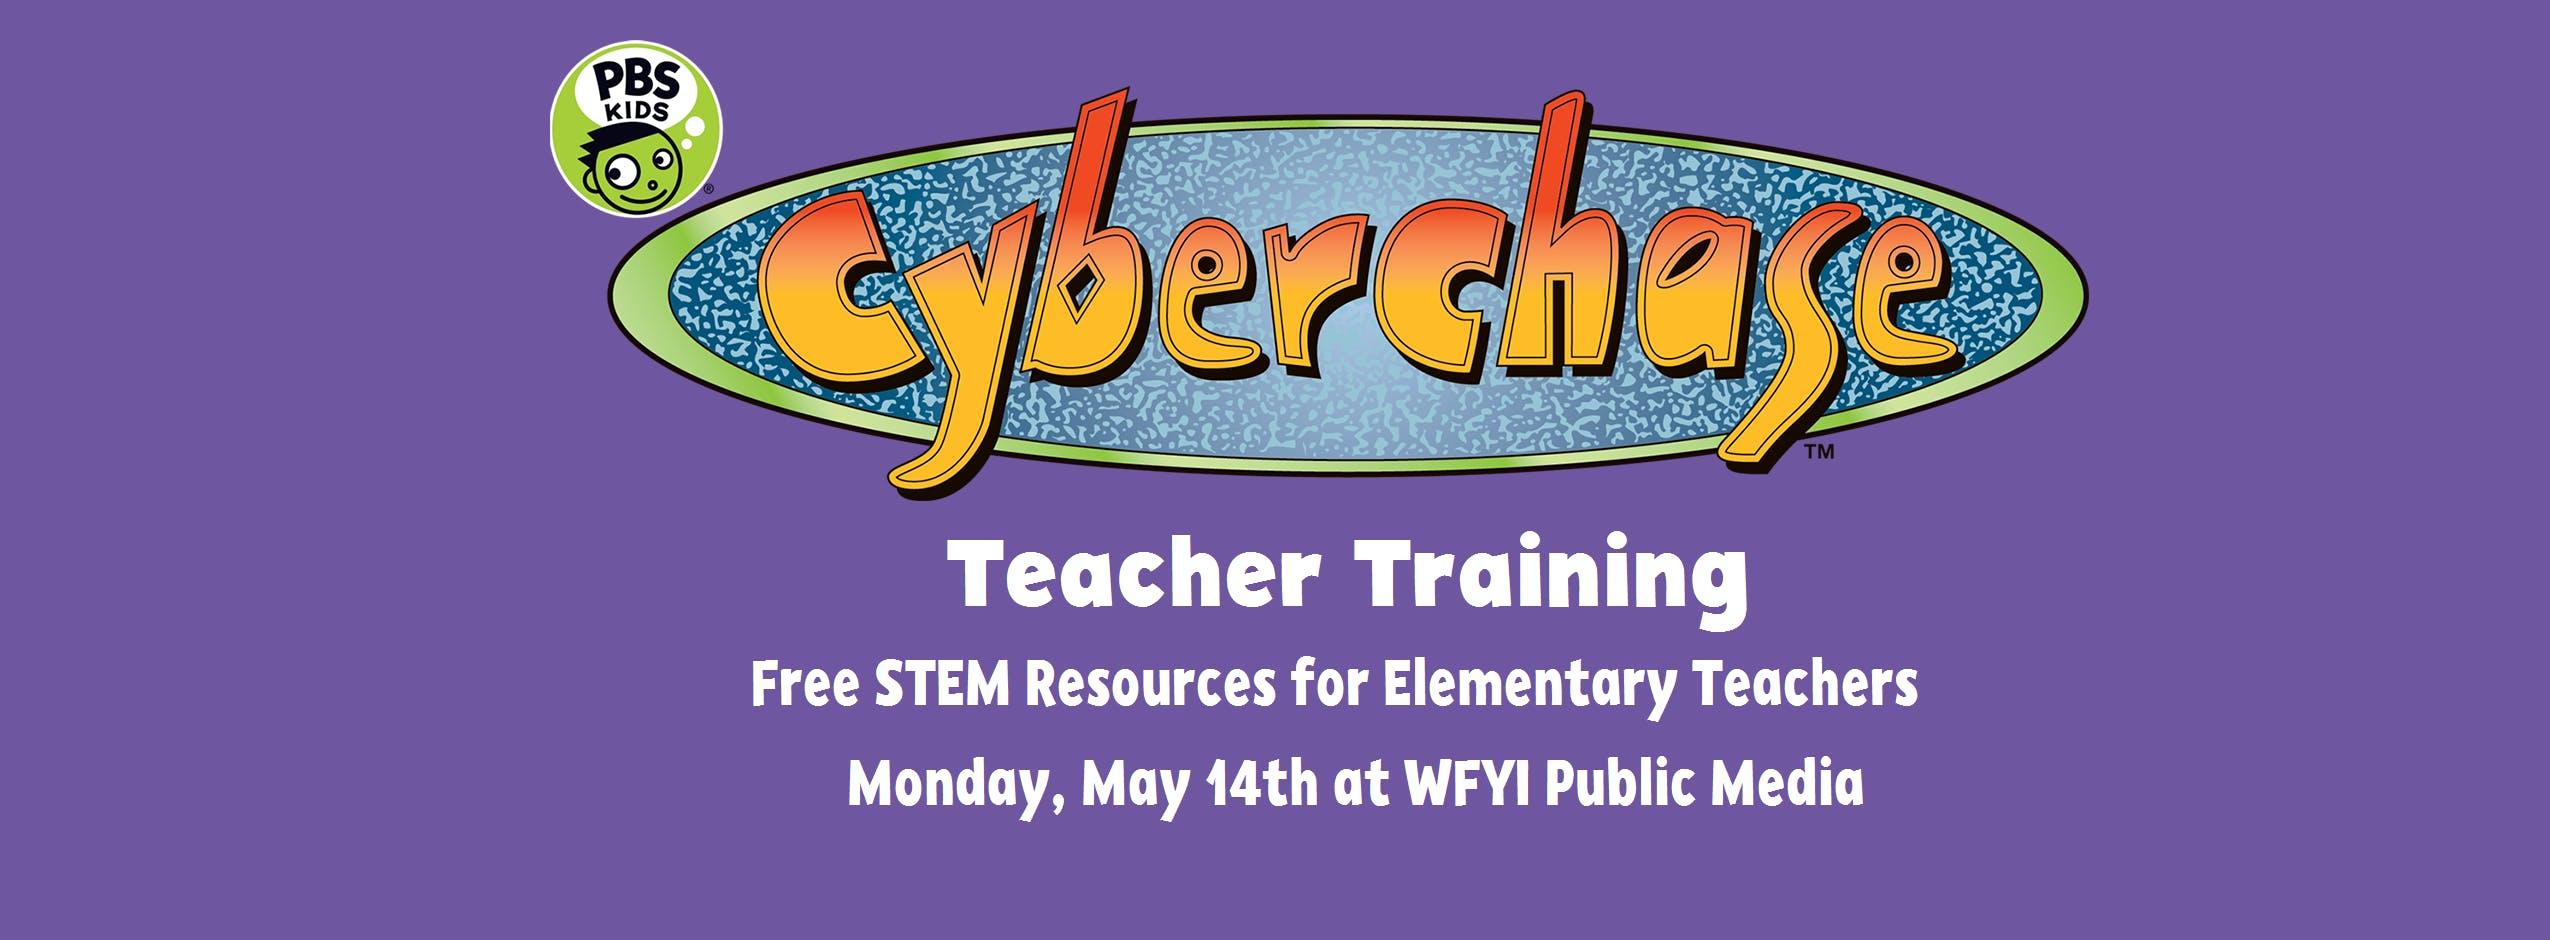 Cyberchase Logo - Cyberchase Teacher Training: NEW PBS Kids STEM Resources - 14 MAY 2018